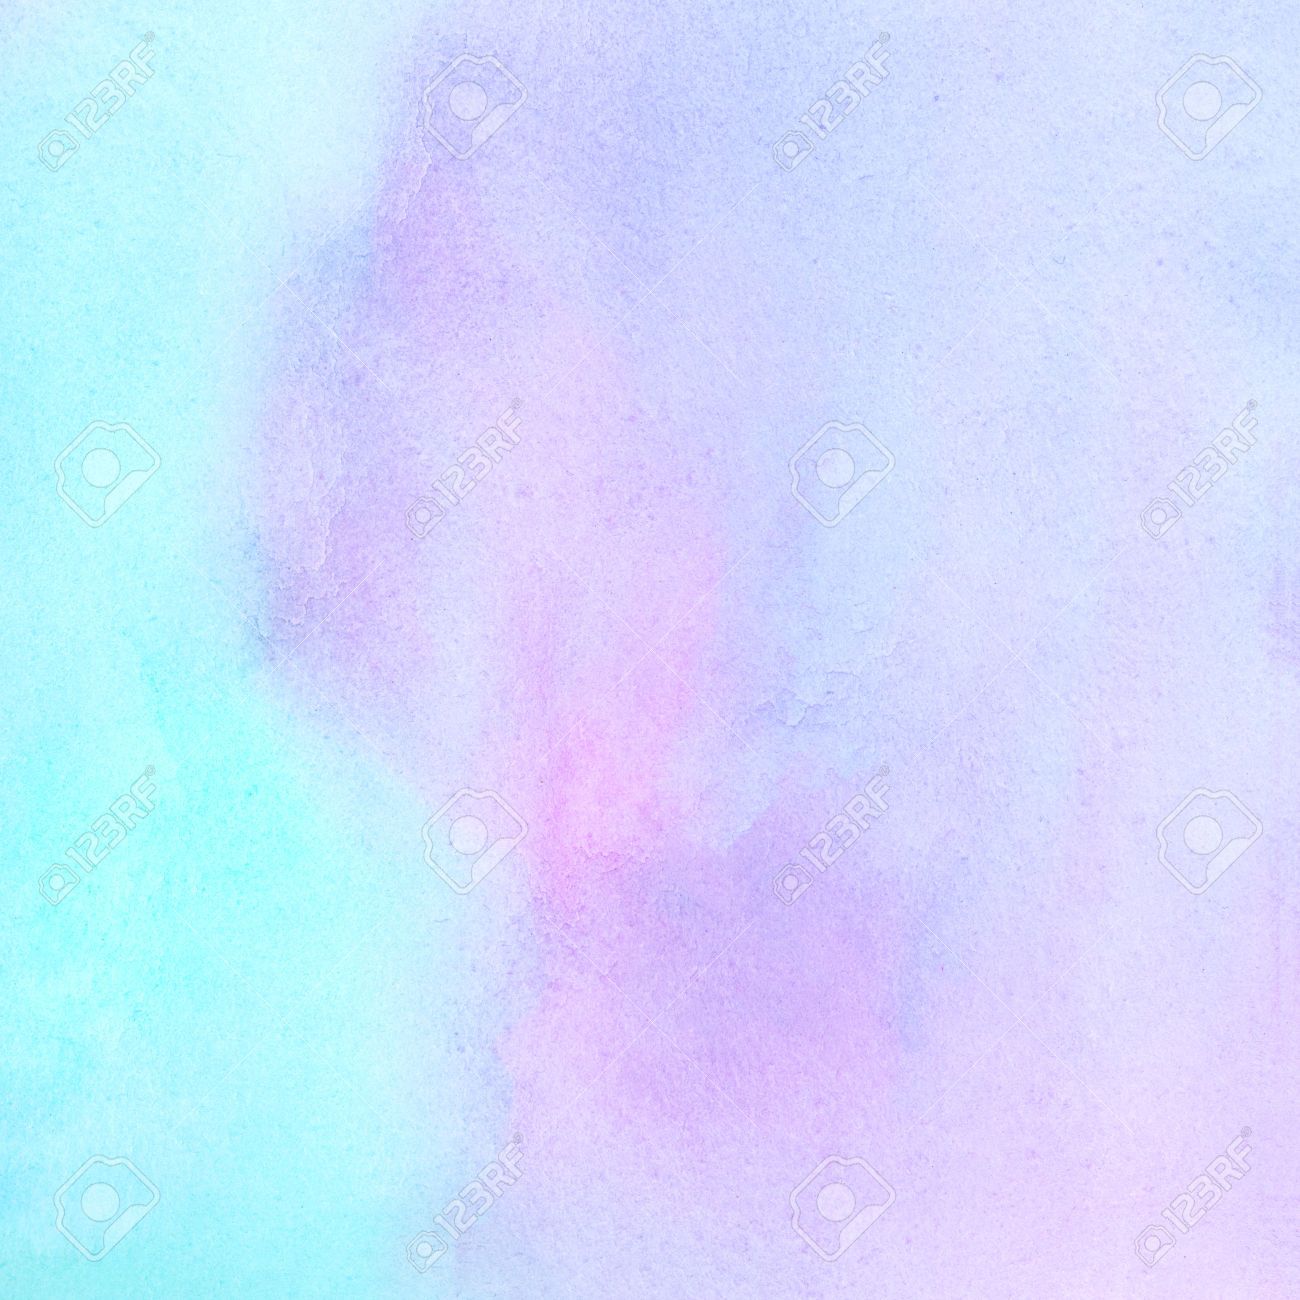 Colorful Watercolor Stains Background Light Pastel Colors Mint